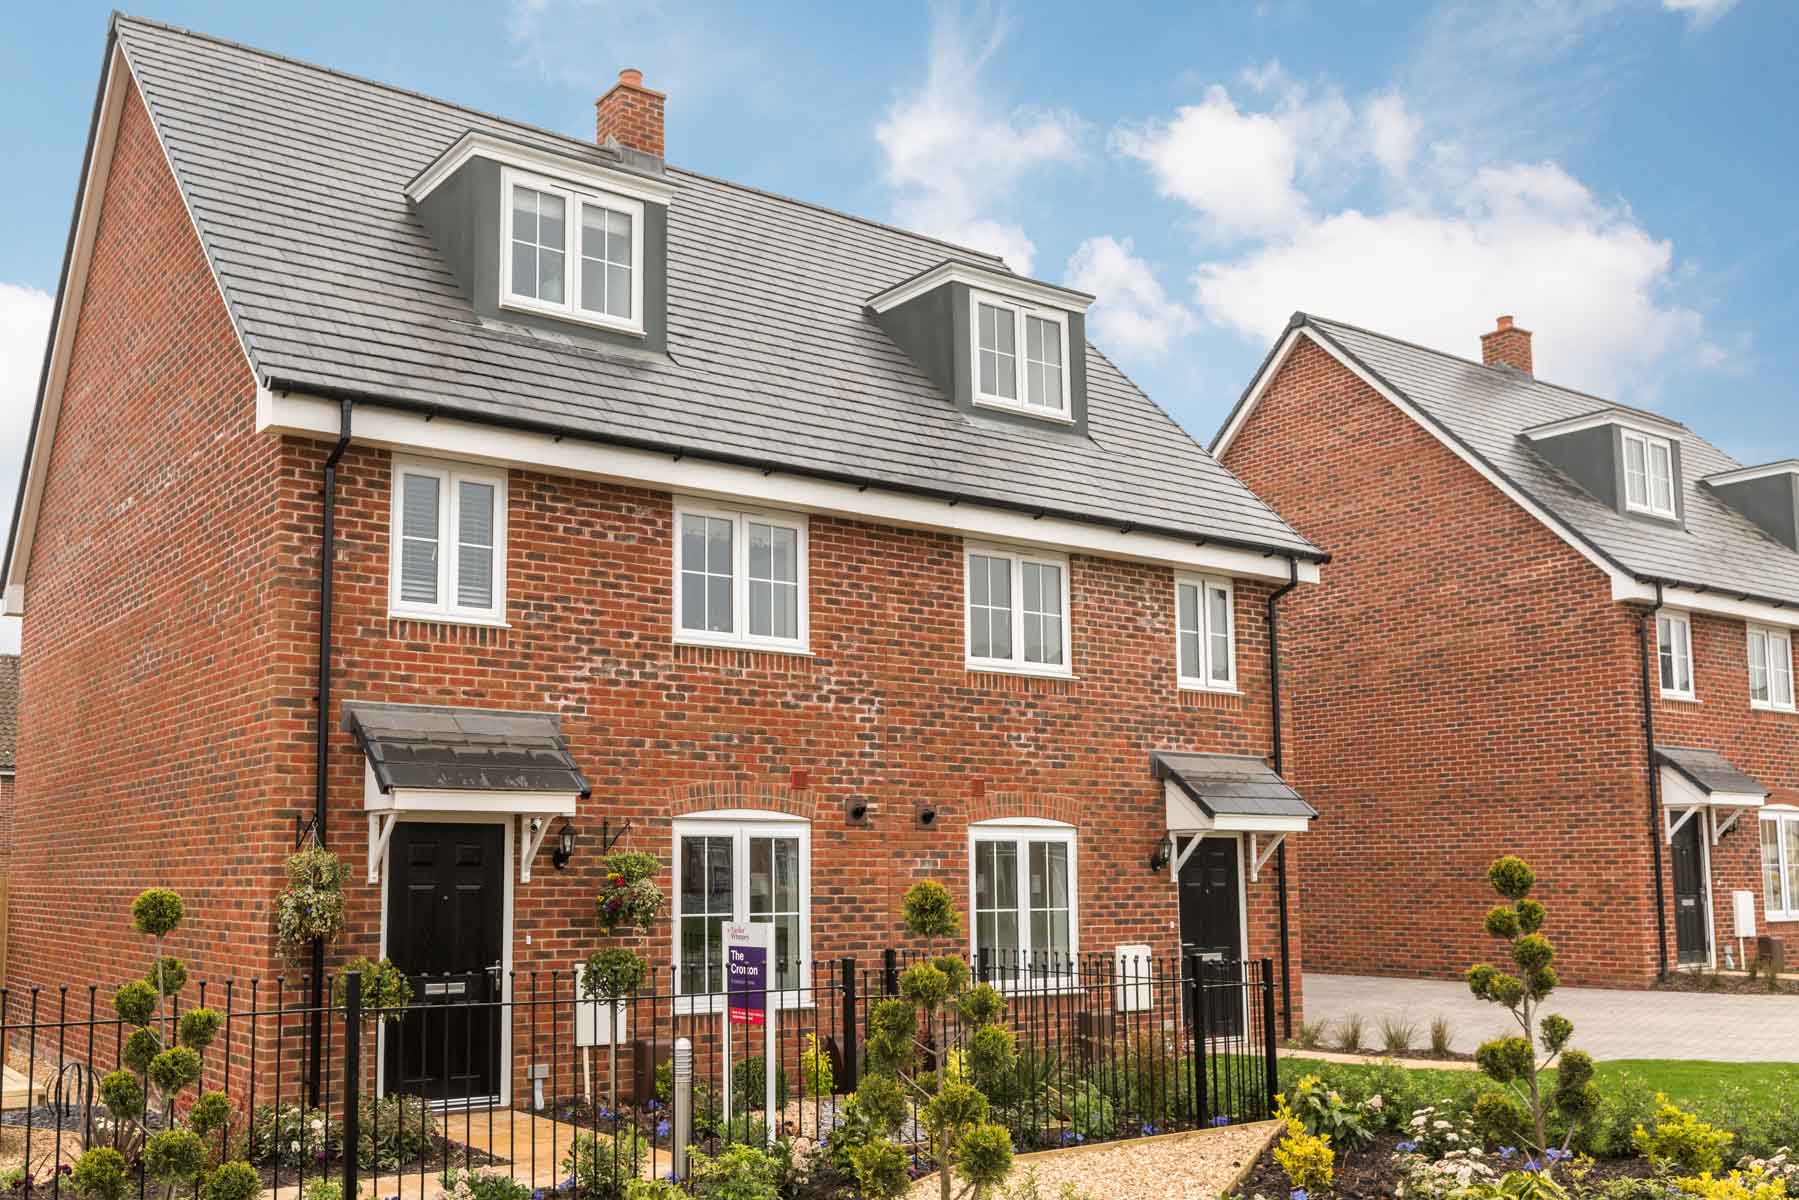 Taylor Wimpey The Crofton